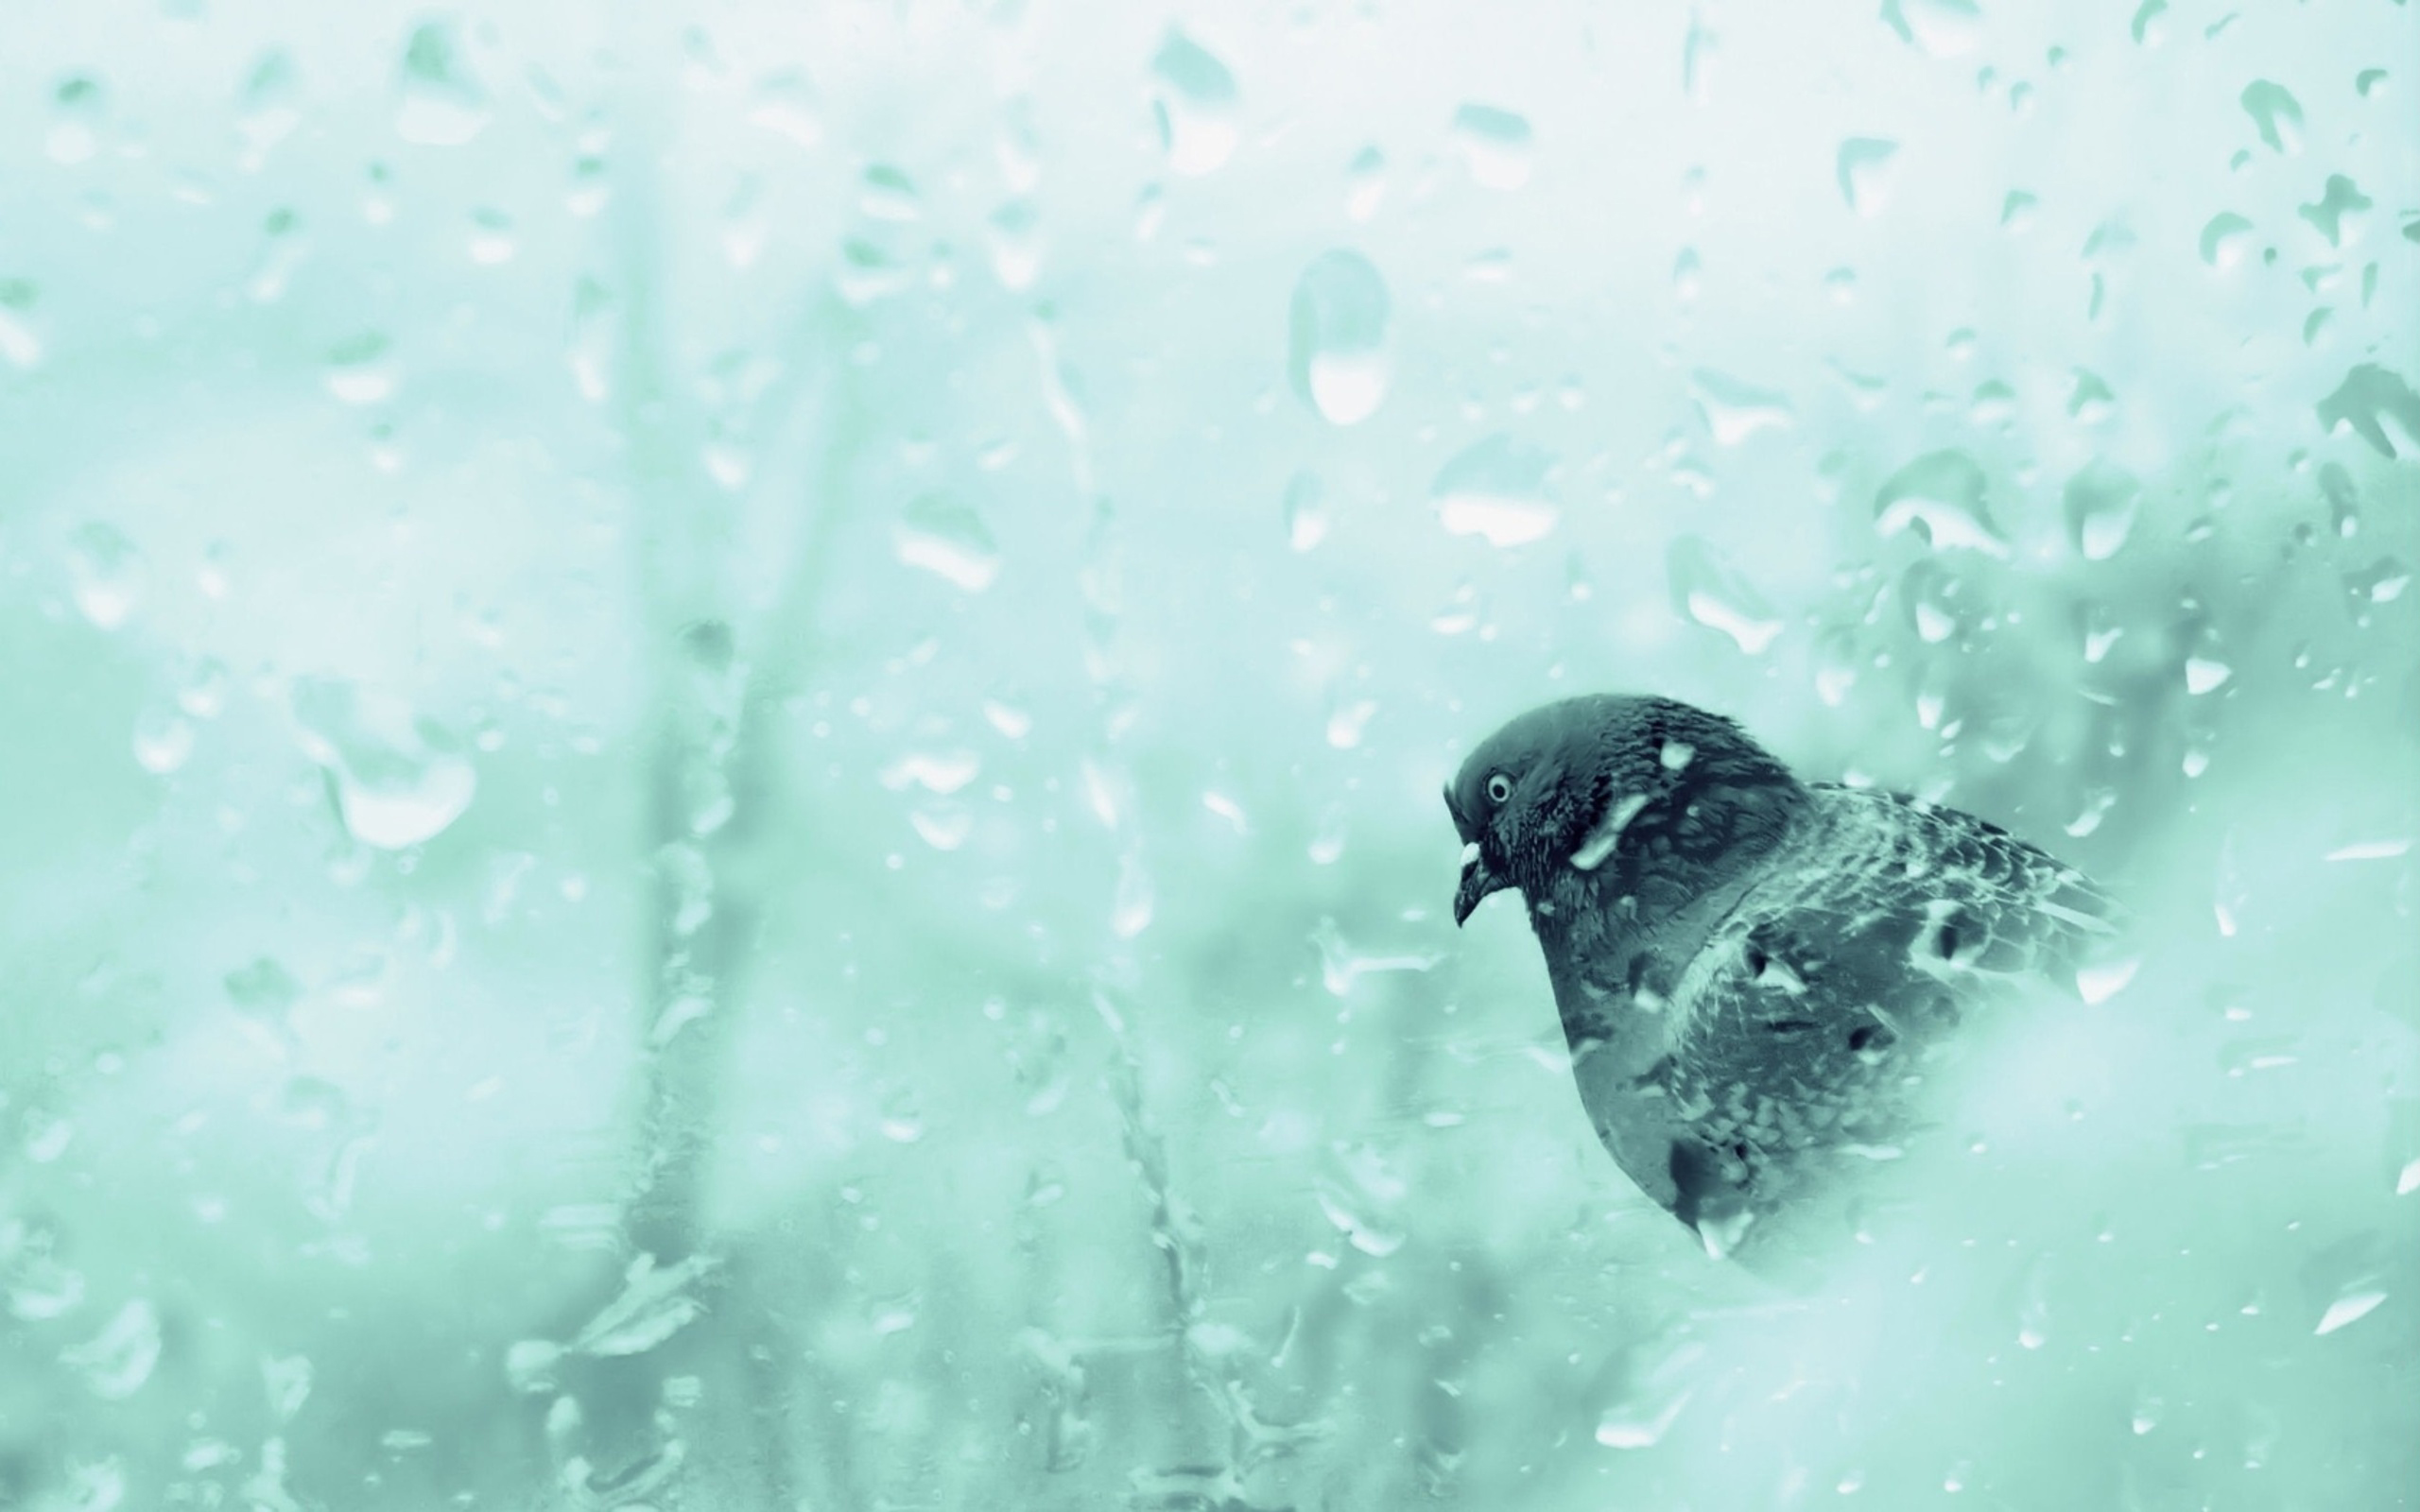 Download Dove In Rainy Day Wallpaper Free Wallpapers